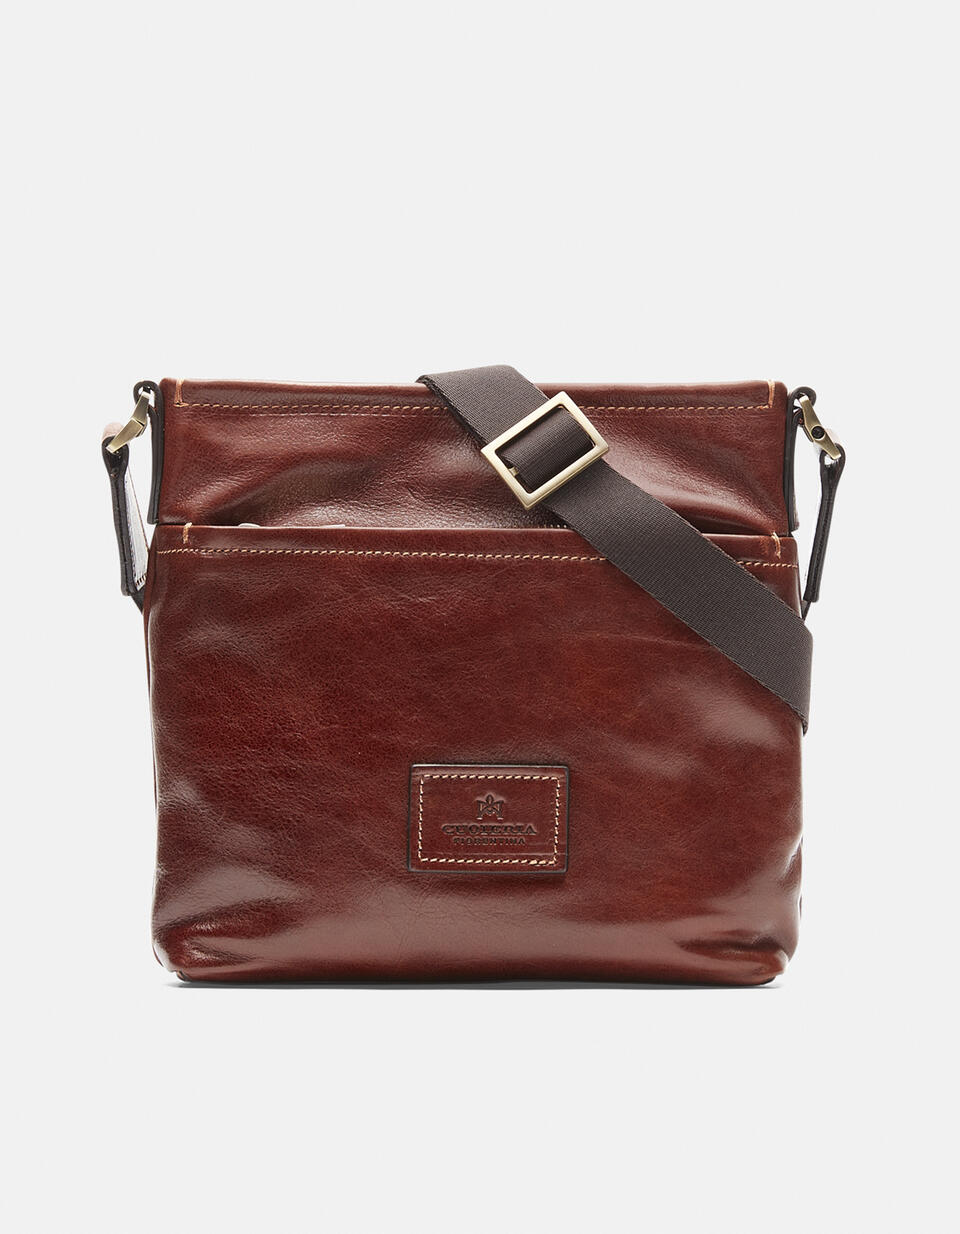 Warm and Color Shoulder strap           with front pocket - Crossbody Bags - MEN'S BAGS | bags  - Crossbody Bags - MEN'S BAGS | bagsCuoieria Fiorentina